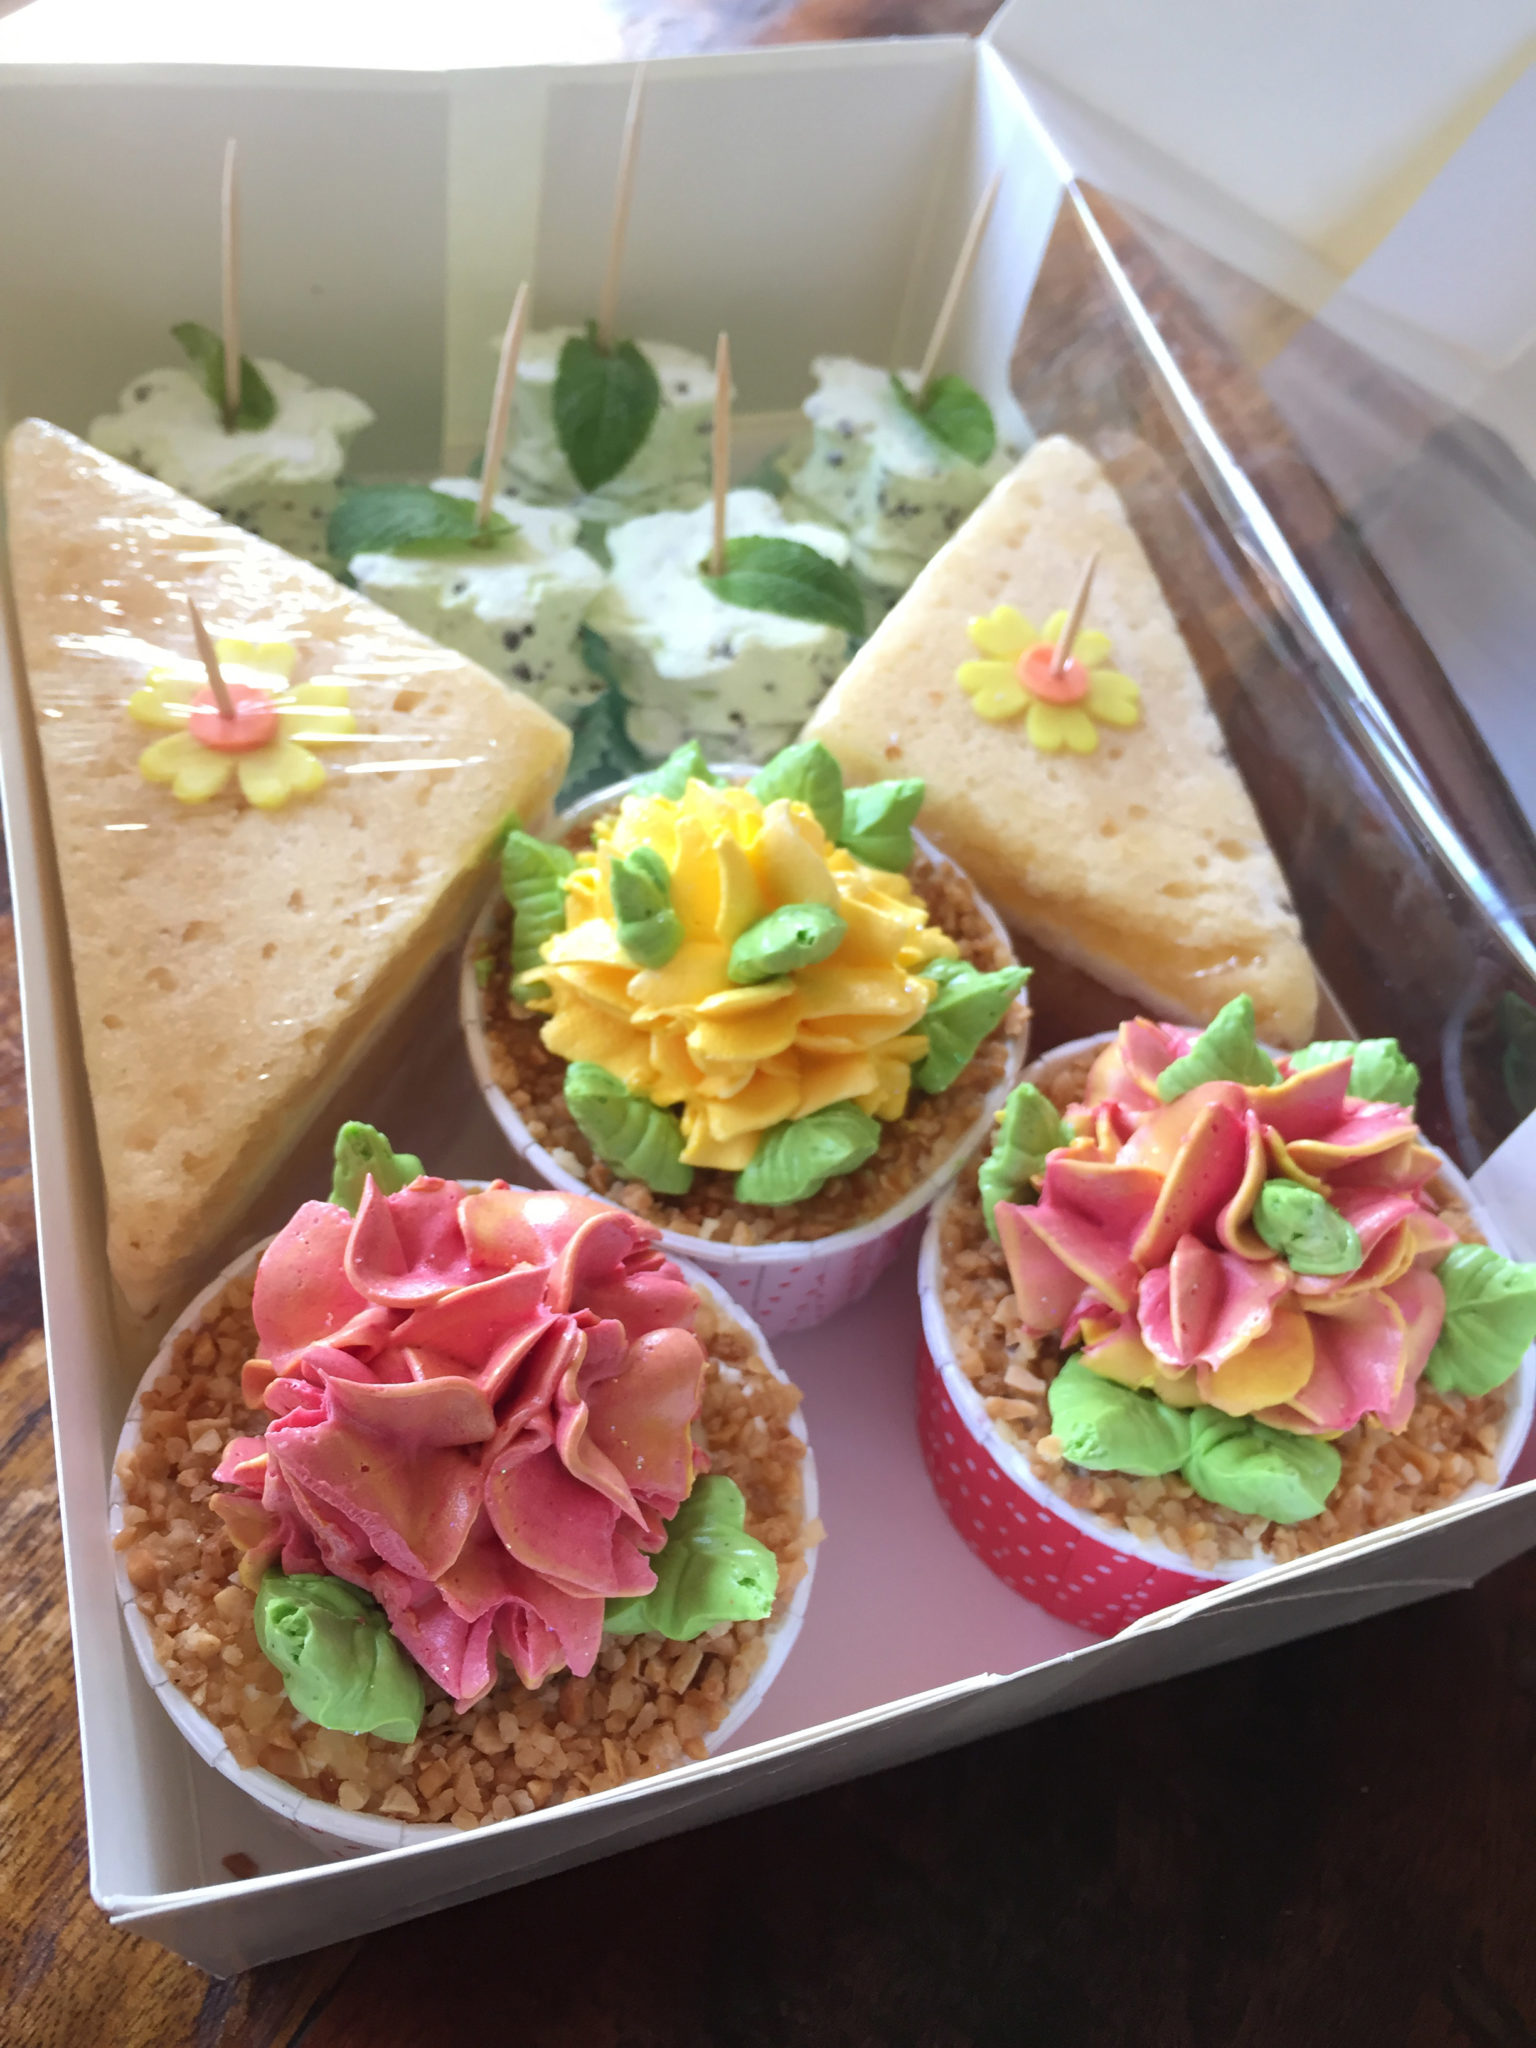 Bake it in a flat tray, sandwich and cut into triangle...the carrot cake recipe is perfect to make magical pic nic boxes with unusual dessert sandwiches